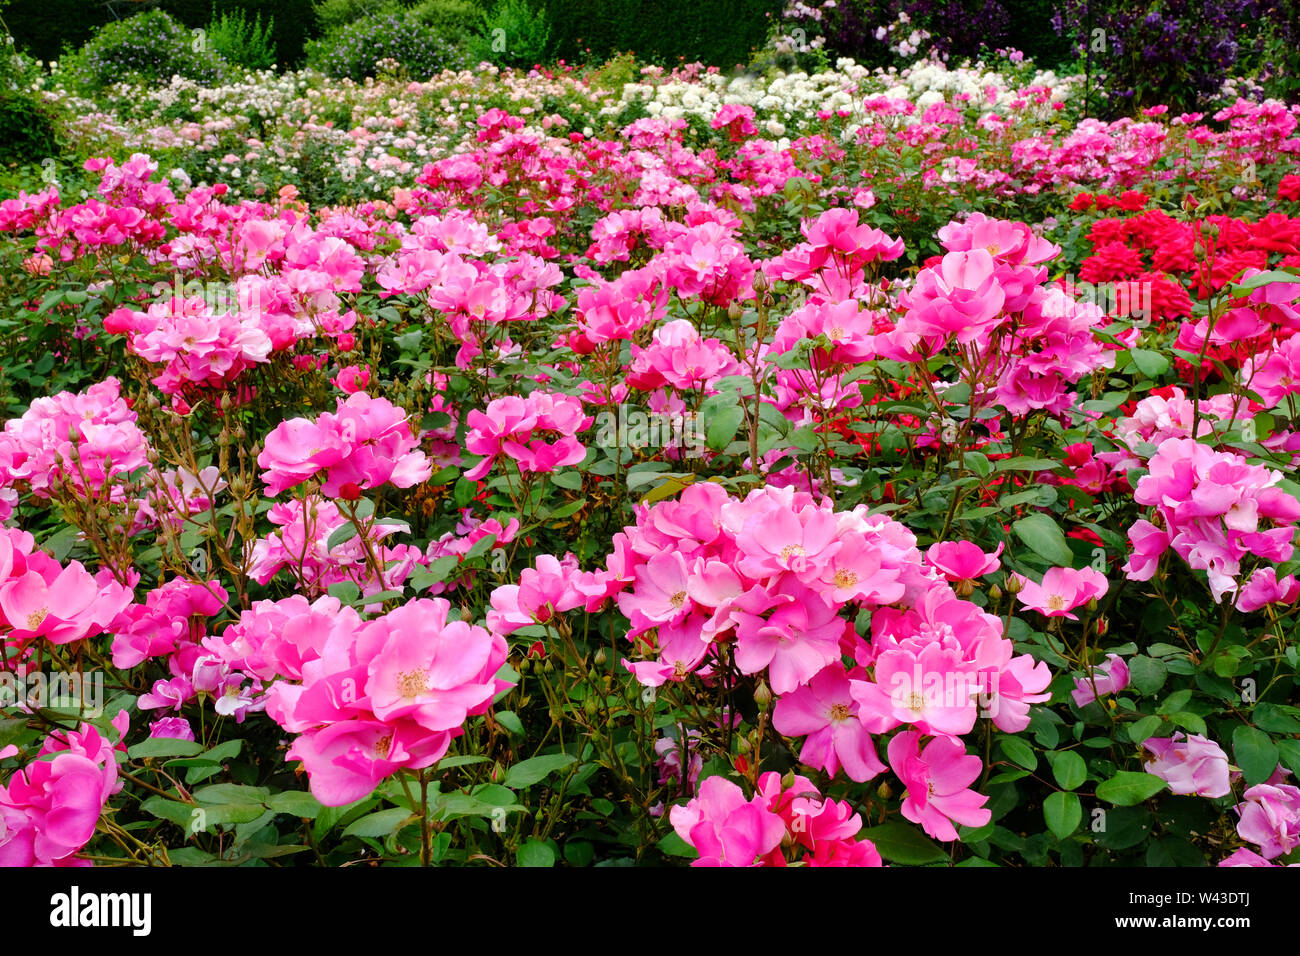 Close-up of a bed of intense red flowering roses, UK - John Gollop Stock Photo